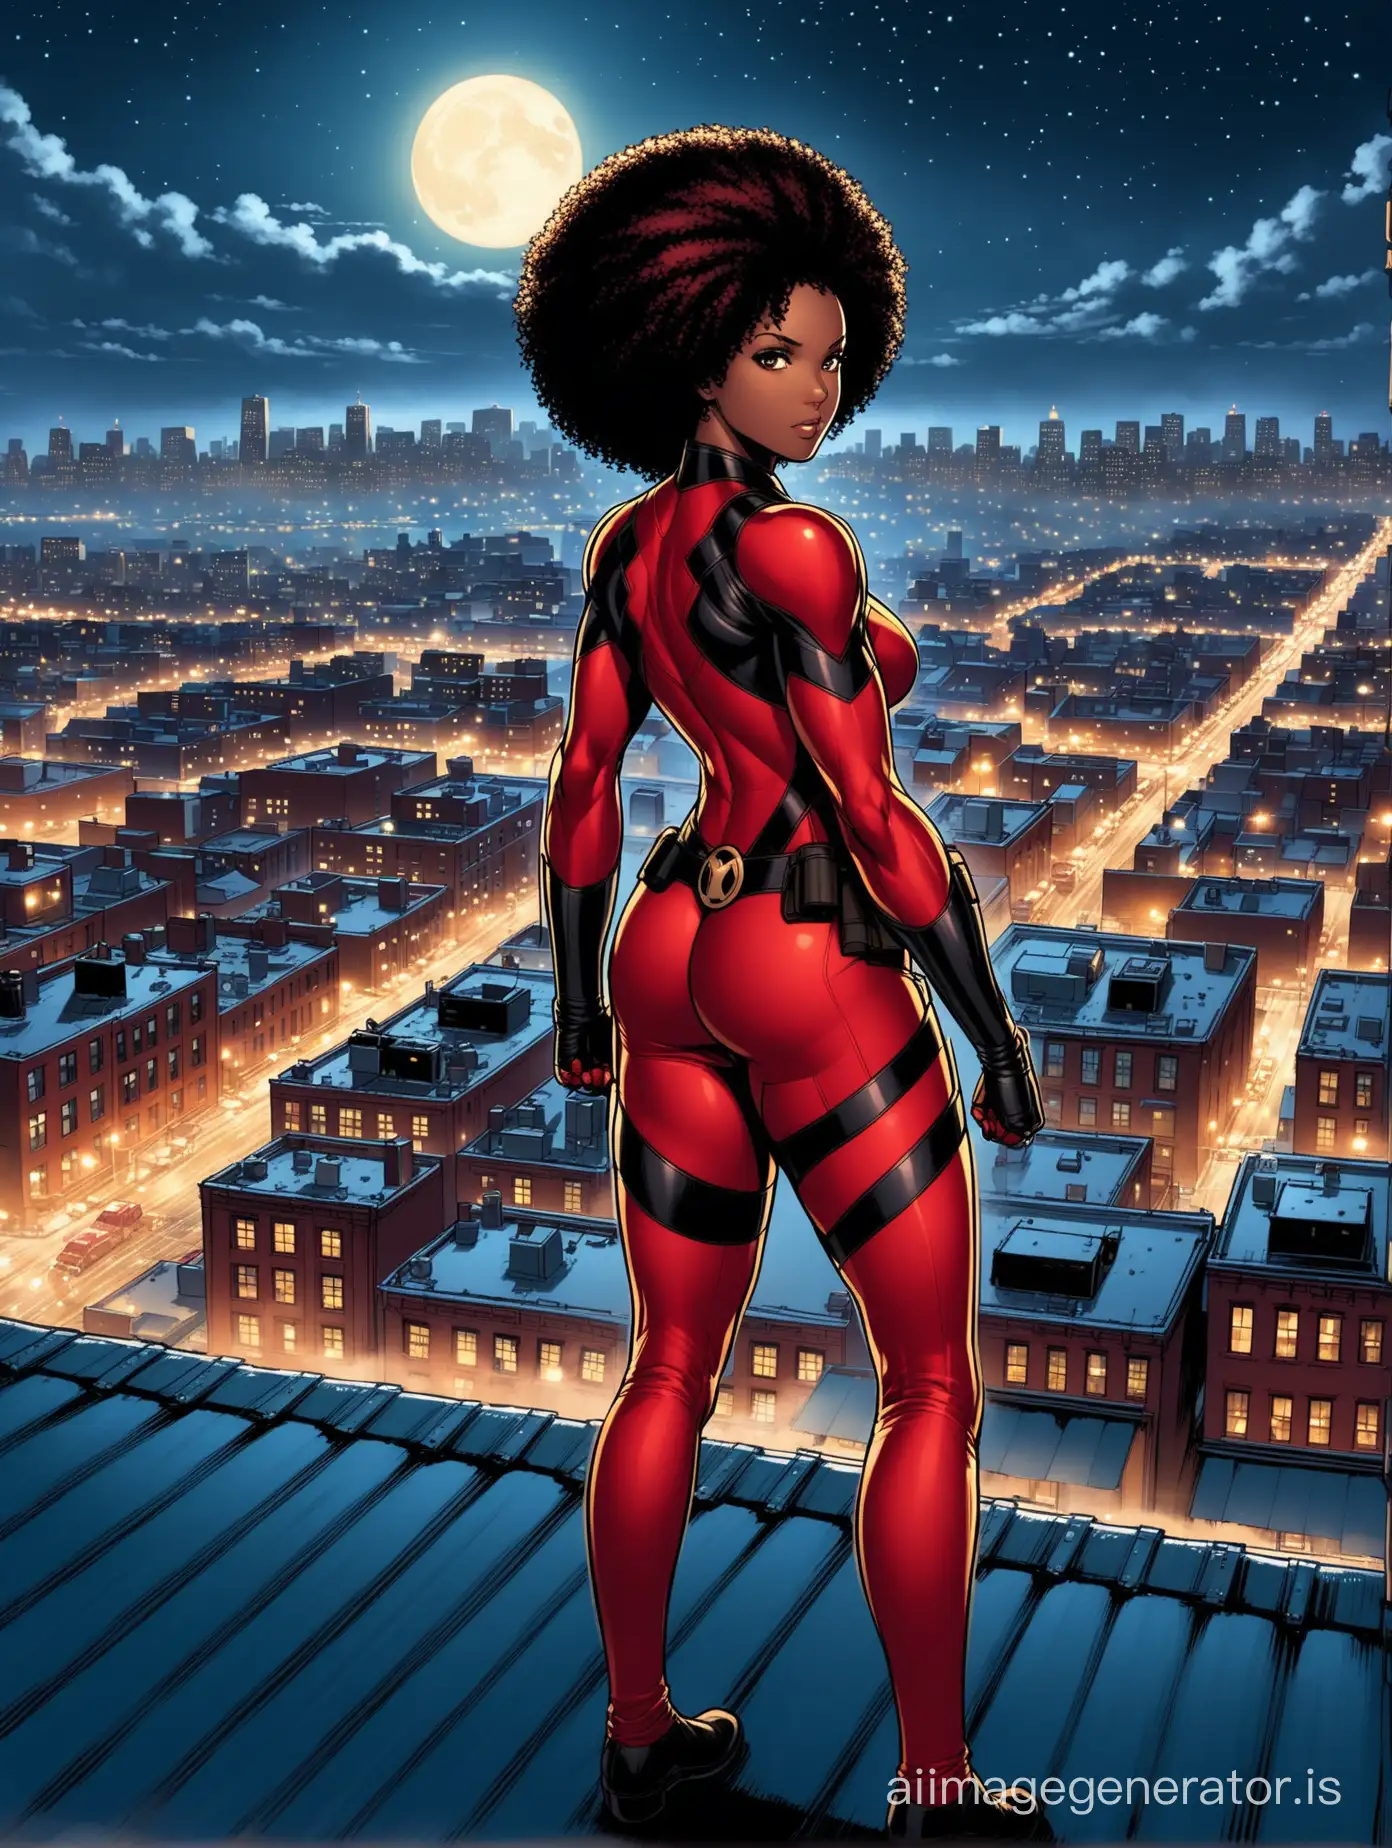 Nighttime-Patrol-Misty-Knight-Watching-Over-Harlems-Rooftops